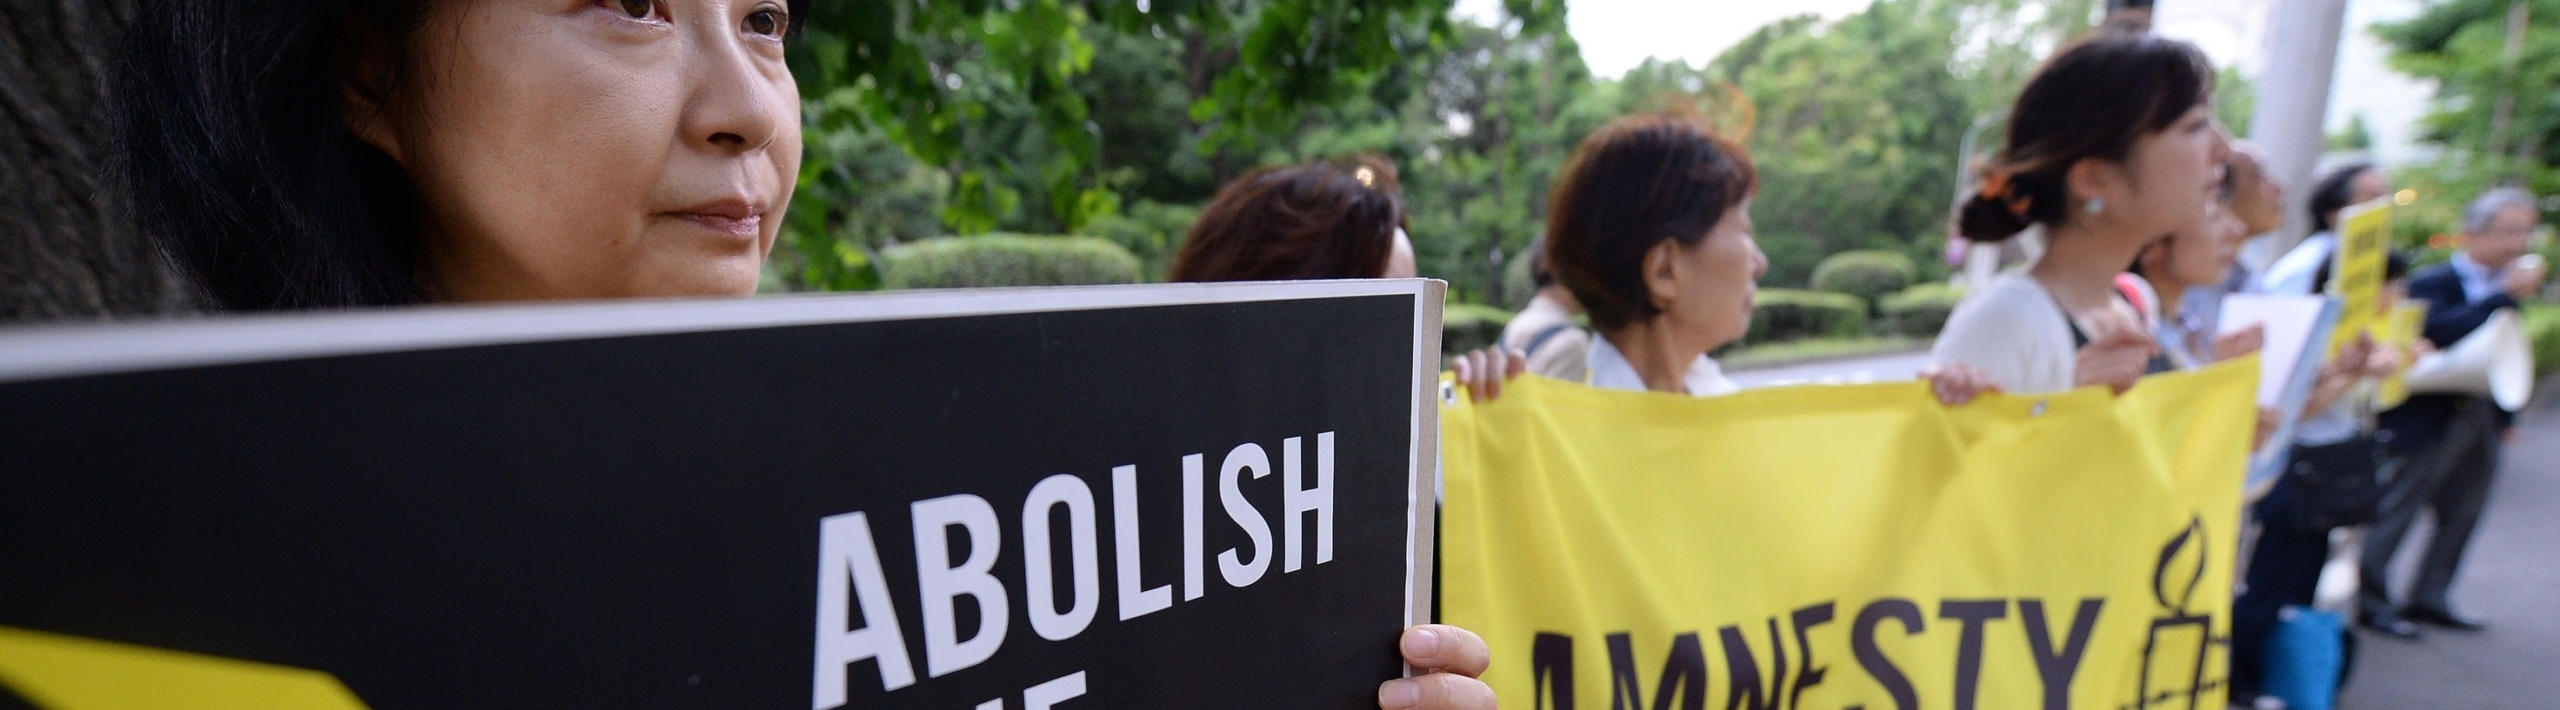 protesters march, holding signs that read Abolish the Death Penalty